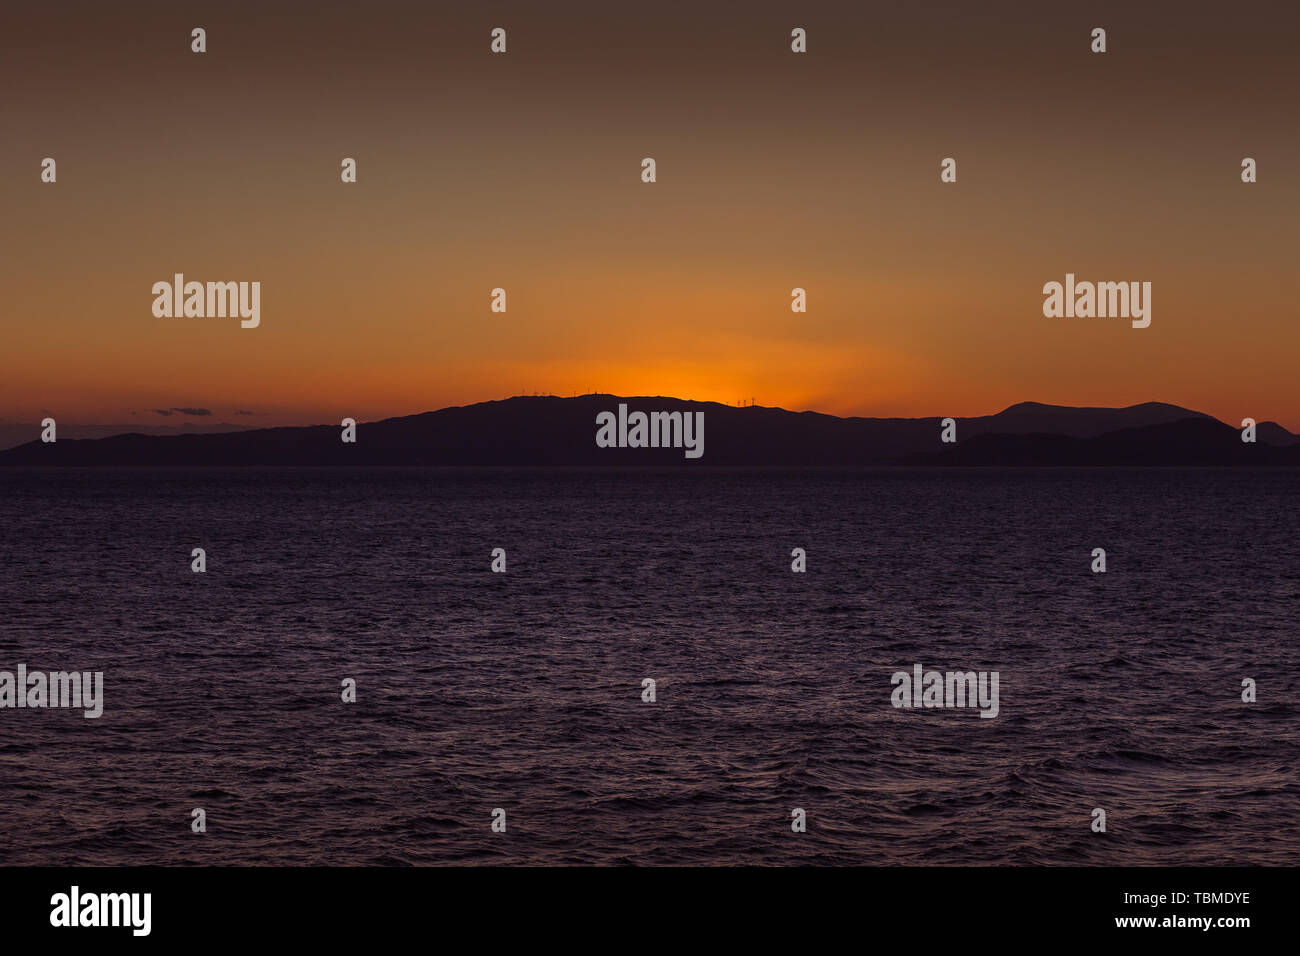 Sun setting behind the profile of island carpeted with wind turbines Stock Photo